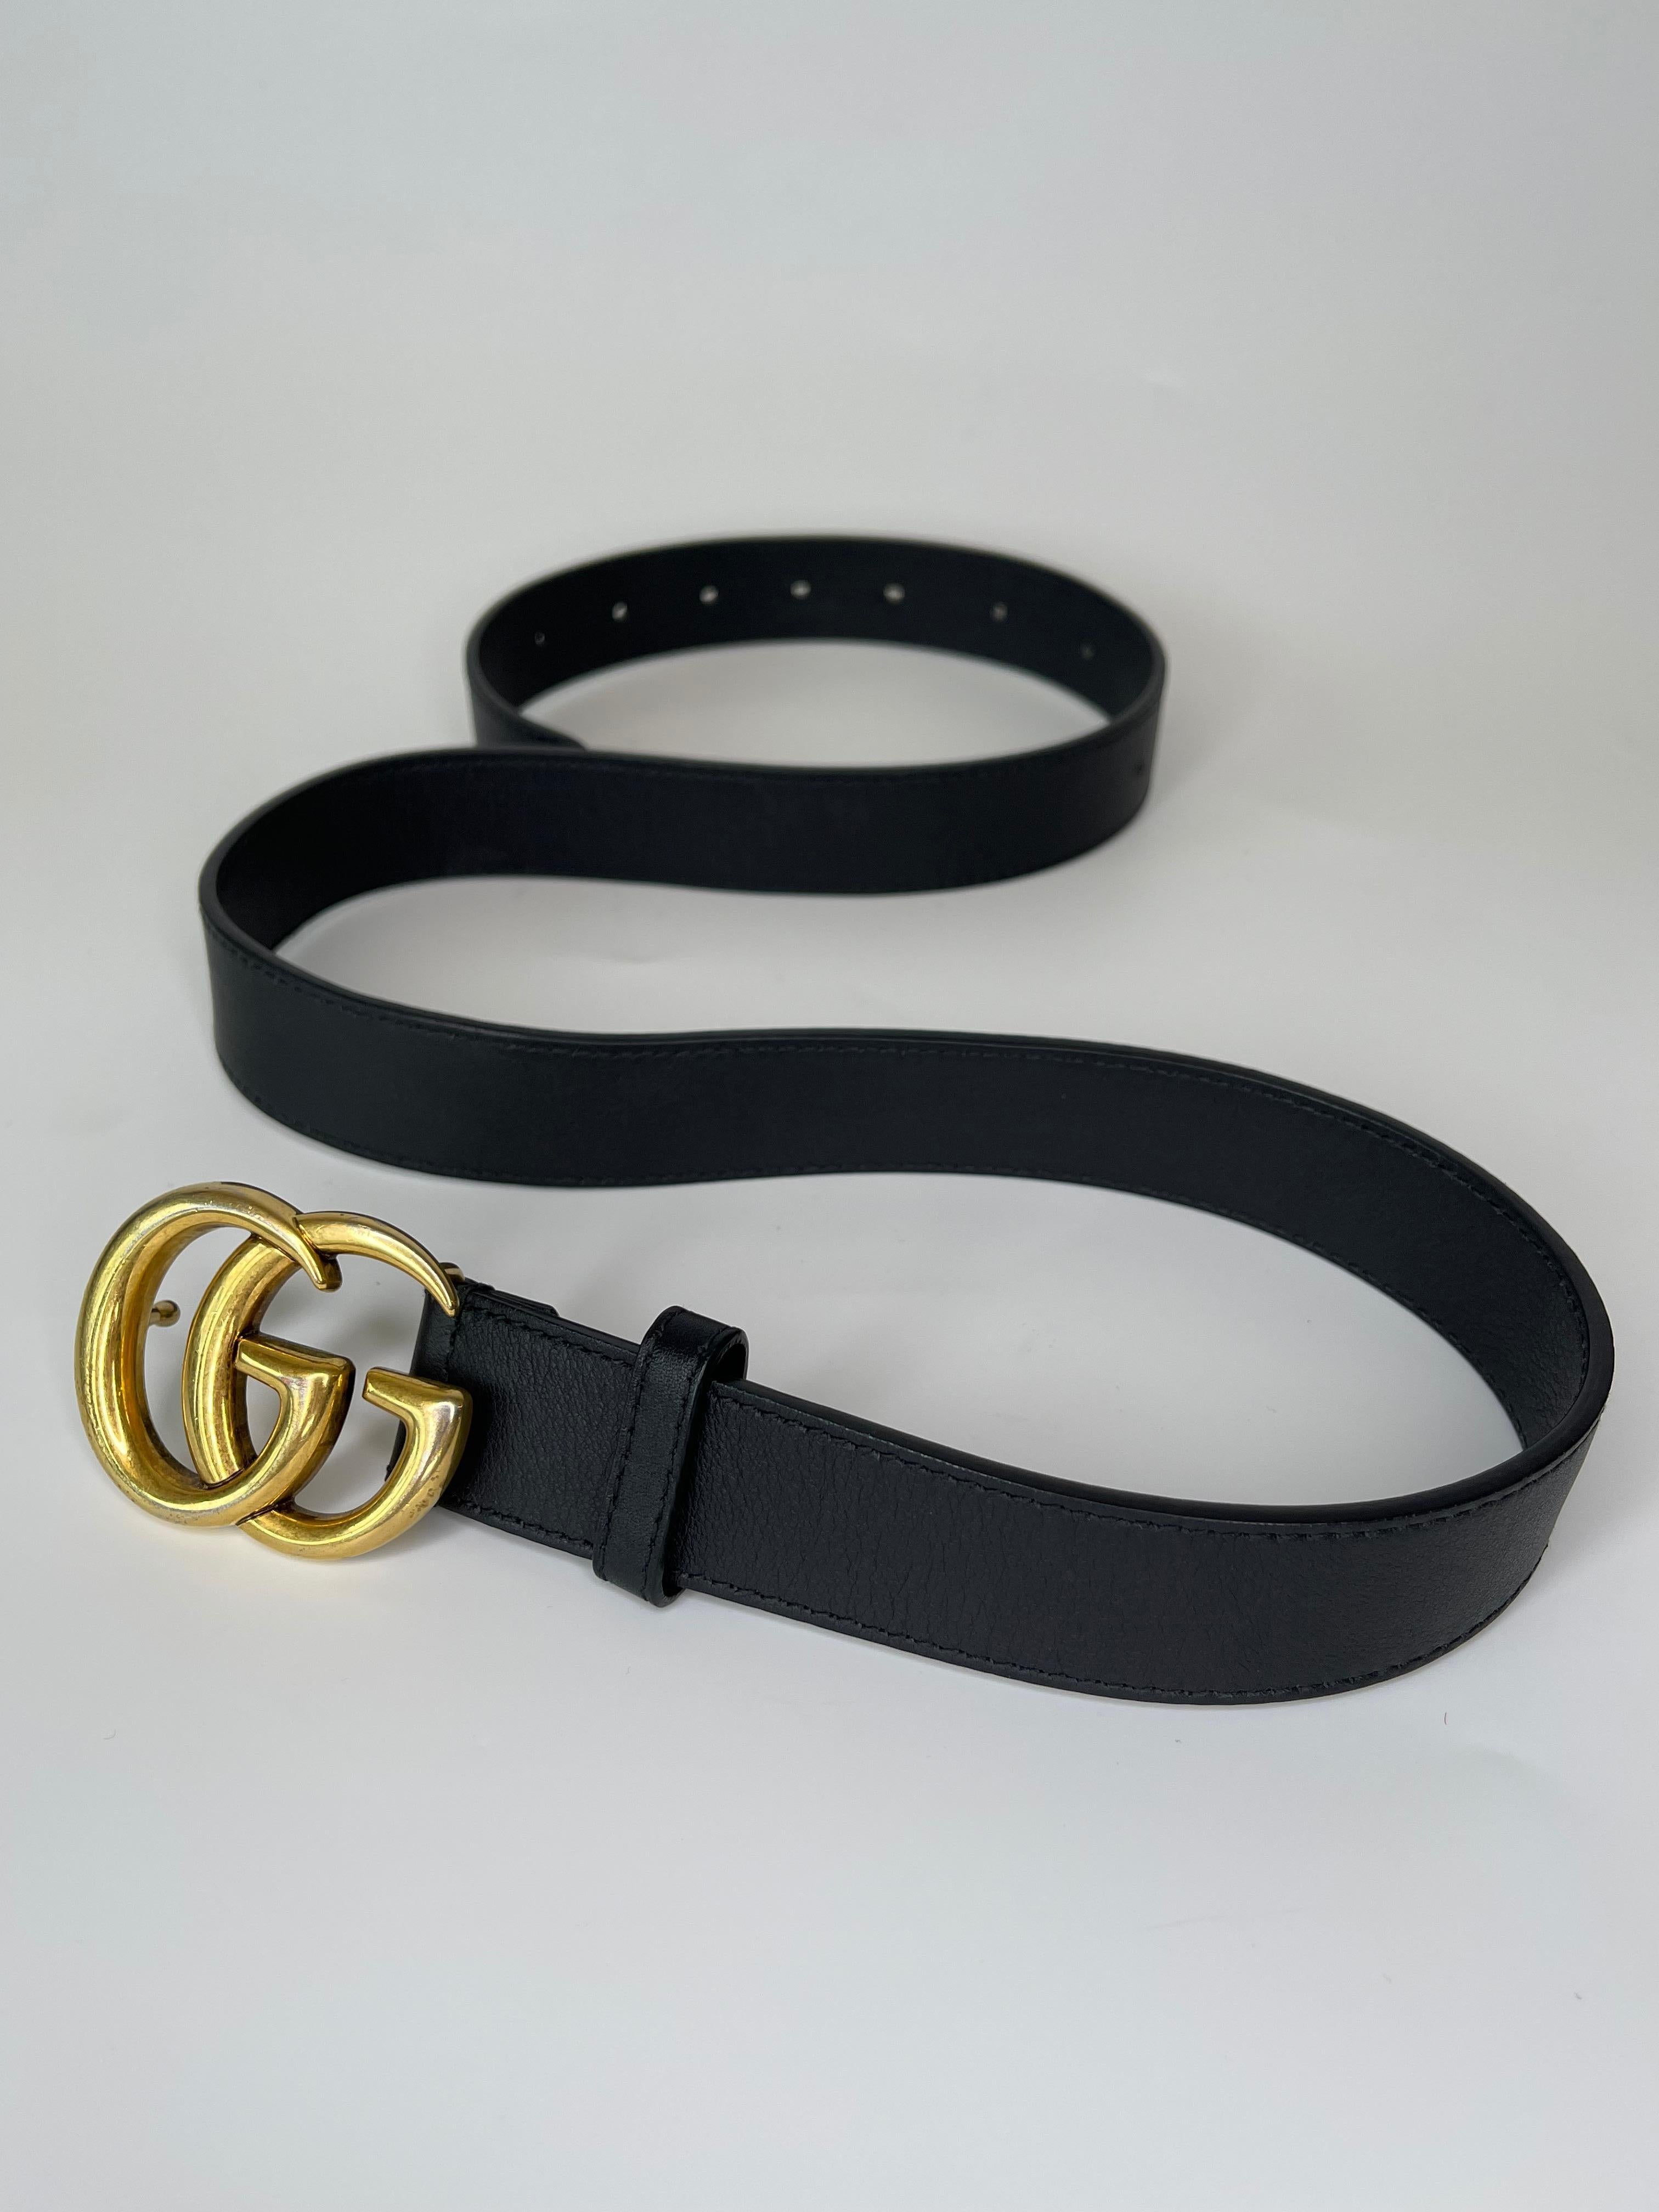 This belt is made of calfskin leather in black and features an aged gold tone  interlocking GG buckle.

COLOR: Black
HARDWARE: Gold tone
ITEM CODE: 414516 APOOT 480199
MATERIAL: Leather
SIZE: 90/36
COMES WITH: Original box
CONDITION: Good condition,